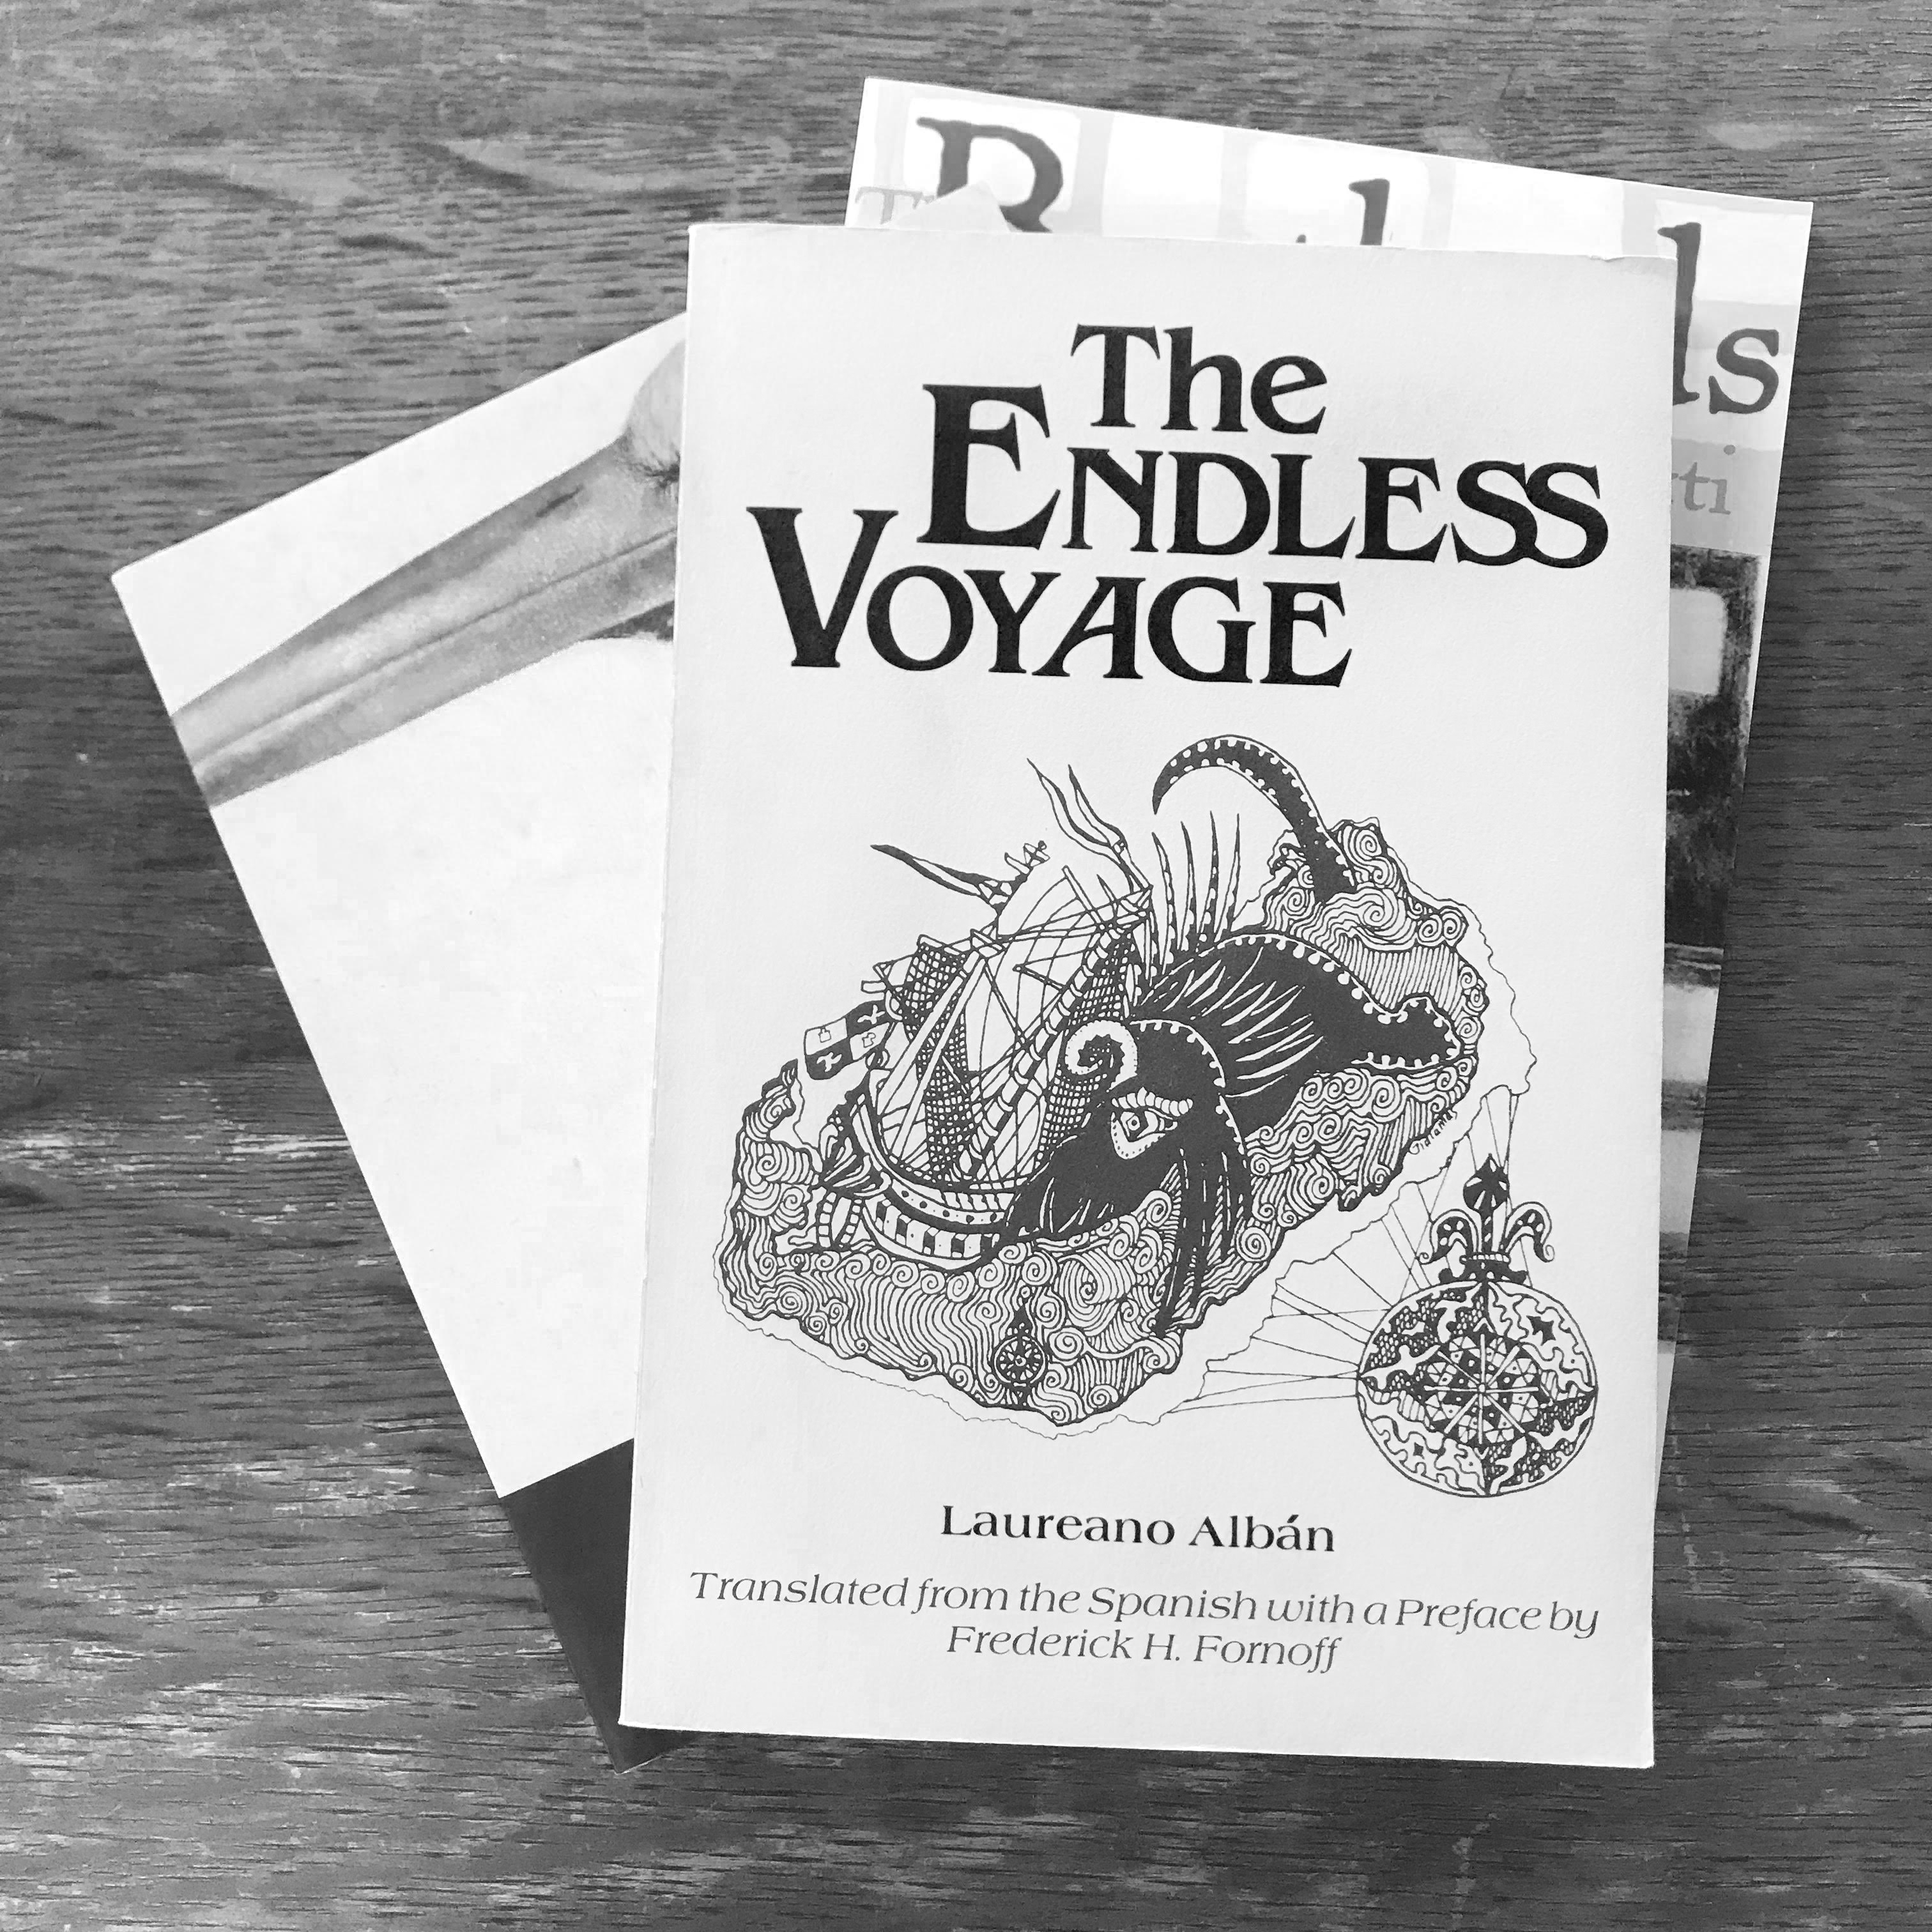 Poetry Review: The Endless Voyage (English and Spanish Edition) by Laureano Alban